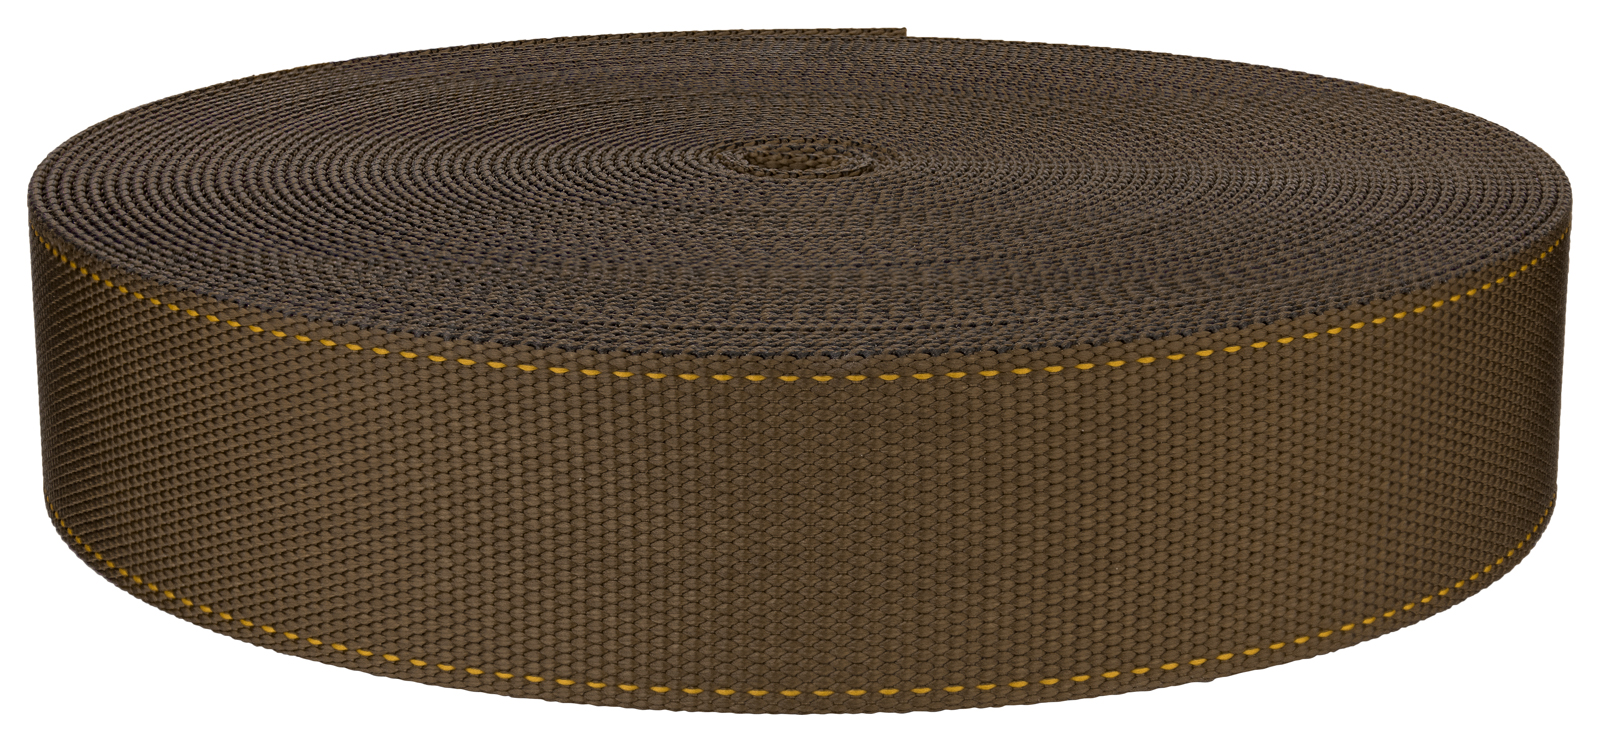 1 3/4 inch Berry Compliant Coyote Tan with Yellow Stripes Heavy Nylon Webbing Closeout, 50 Yards - image 1 of 1